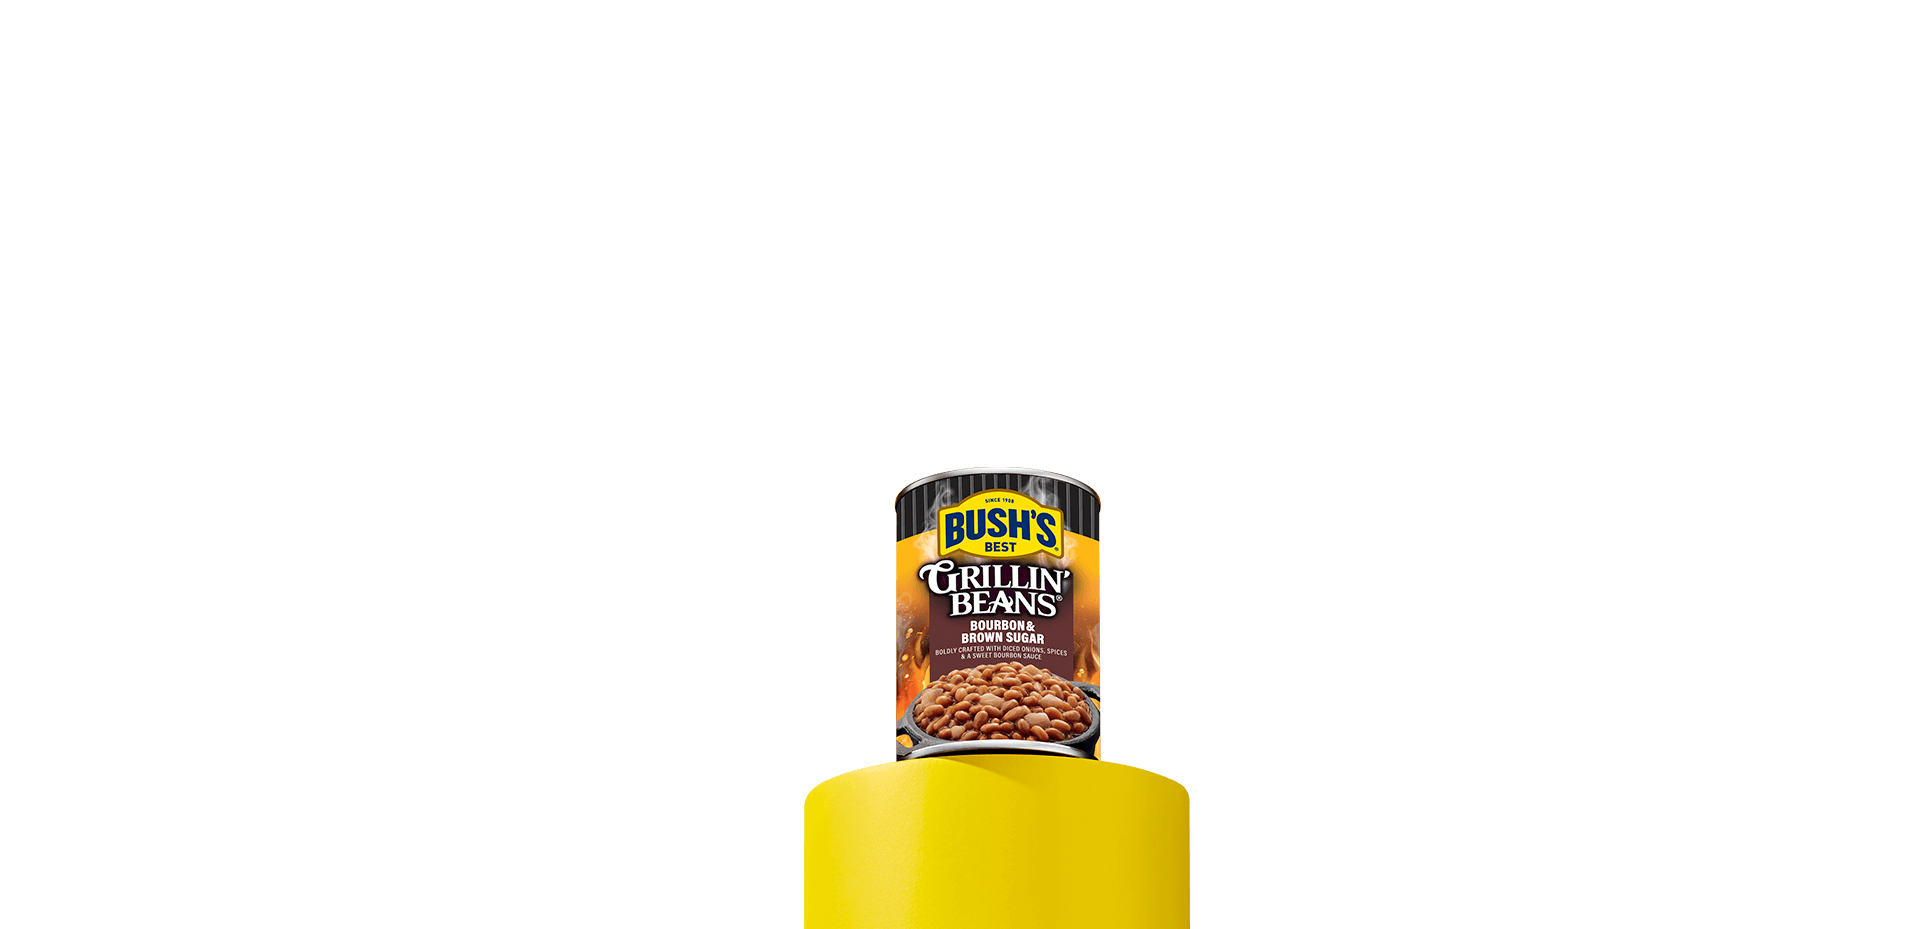 Can of Bush's Grillin' Beans on a yellow Pedestal